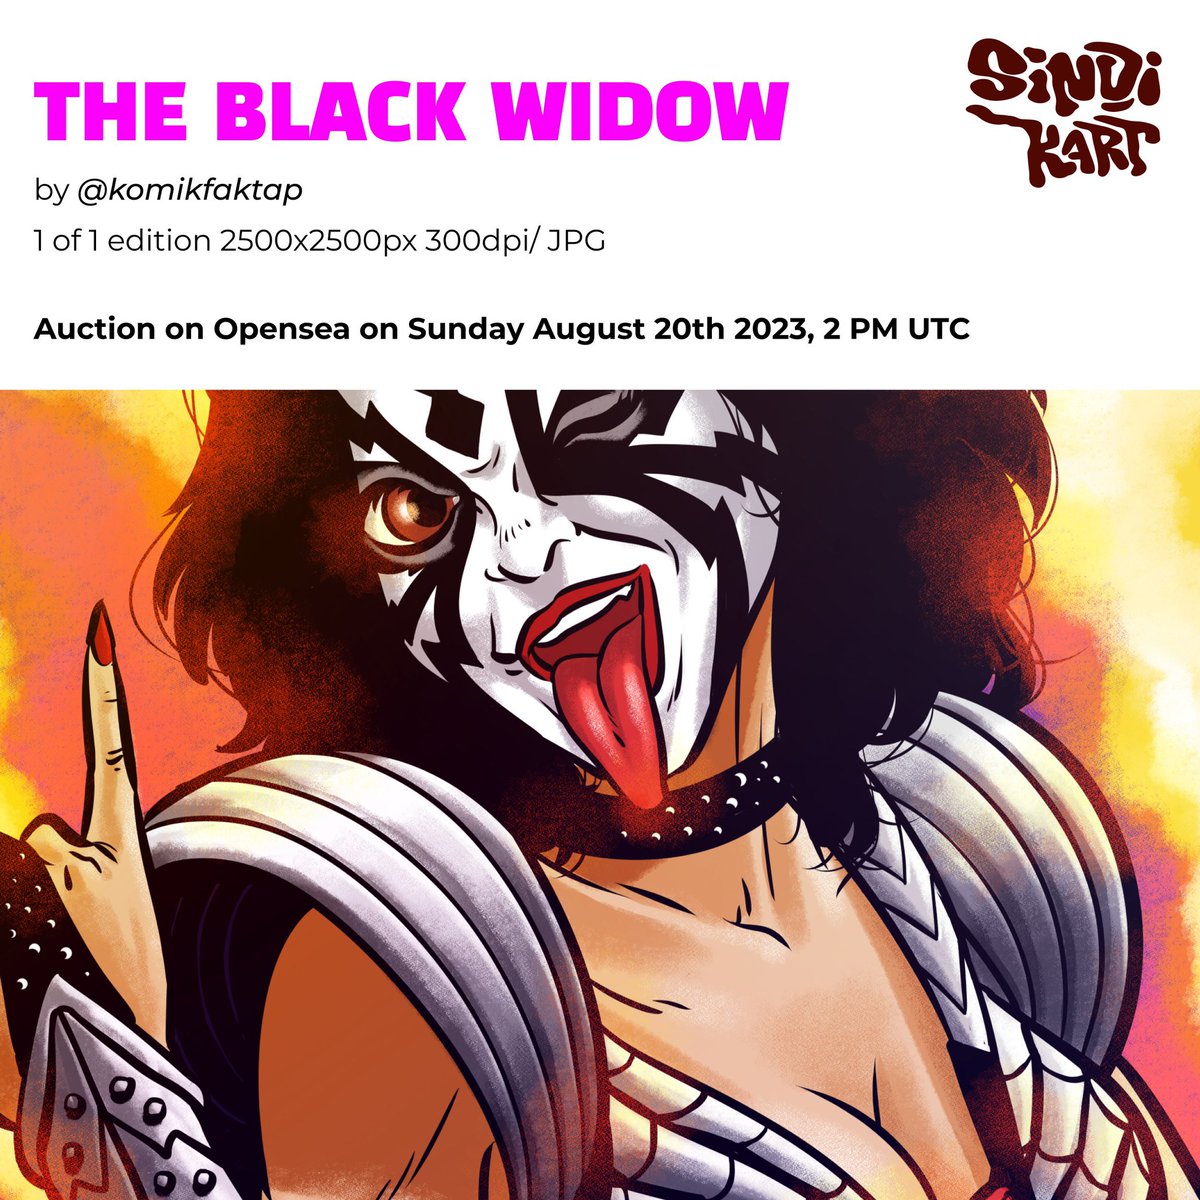 Pure awesomeness by @KomikFaktap “What if that rock band whose members wear kabuki-style face paint was to welcome the female members? Allow me to introduce the badass guitar-shreddin' goddess, The Black Widow!”